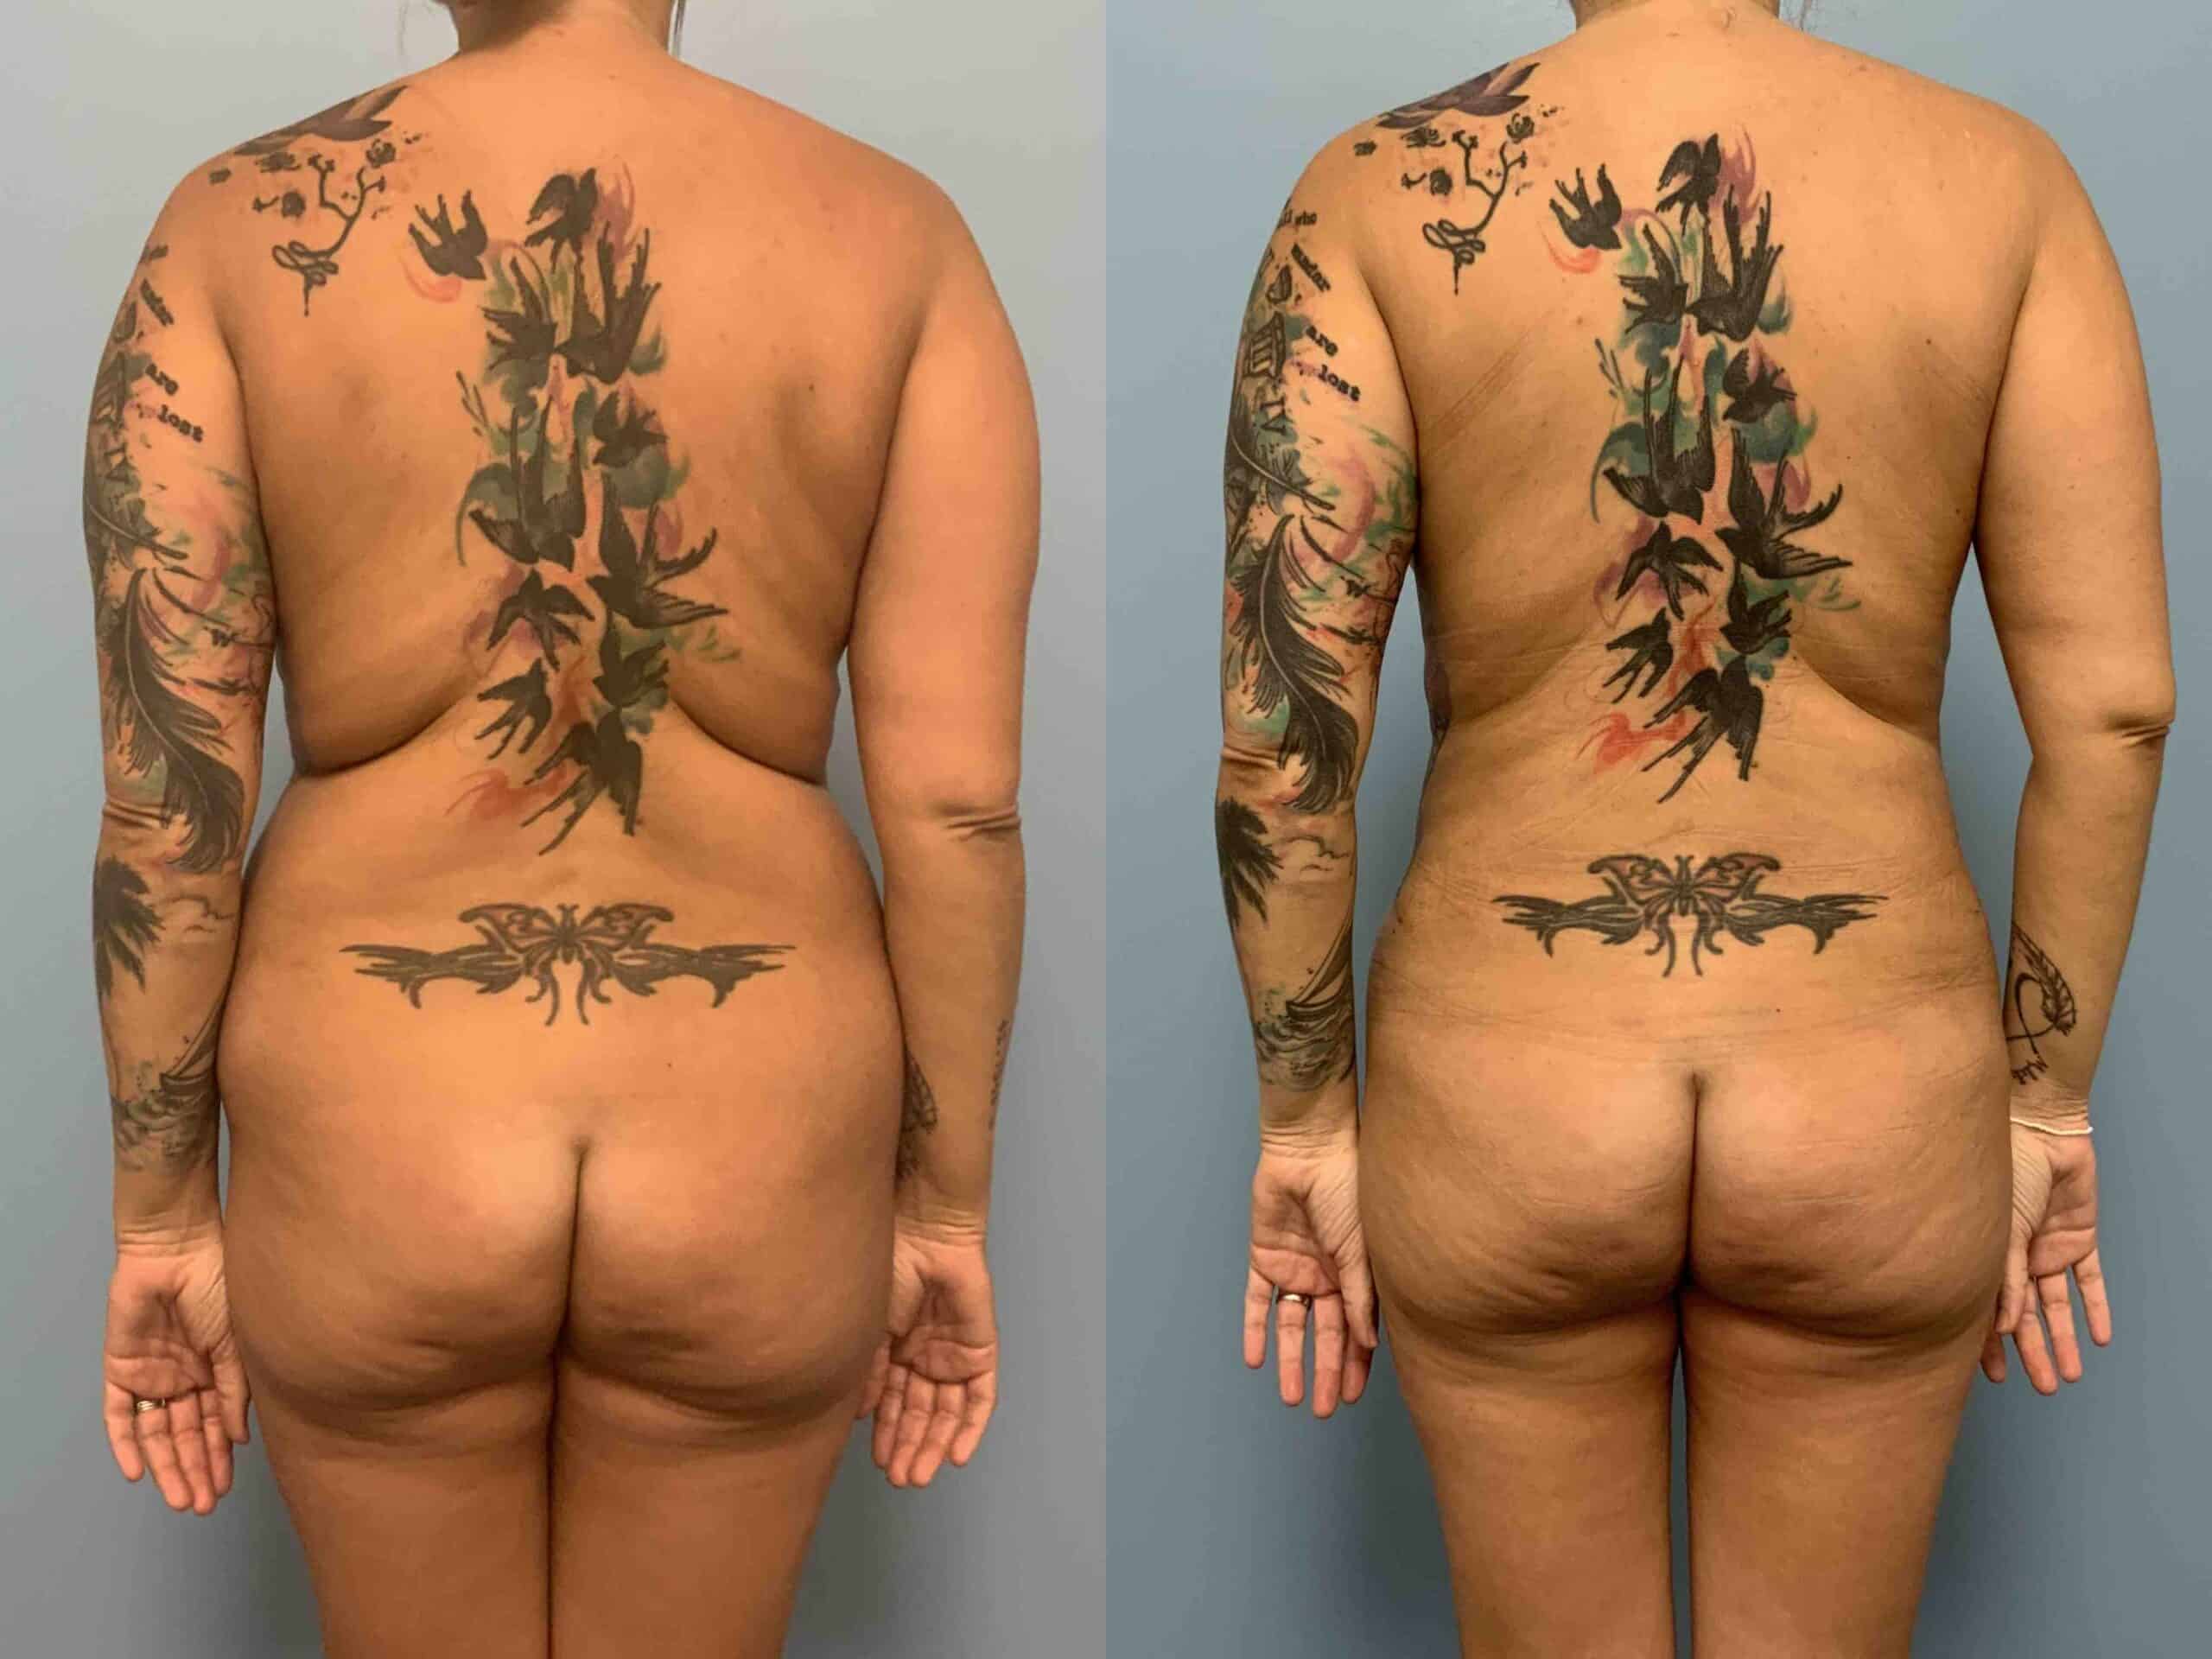 Before and after, 1 mo post op from VASER Abdomen, Axilla, Flanks, and Mons, Tummy Tuck, Breast Lift/Mastopexy performed by Dr. Paul Vanek (rear view)